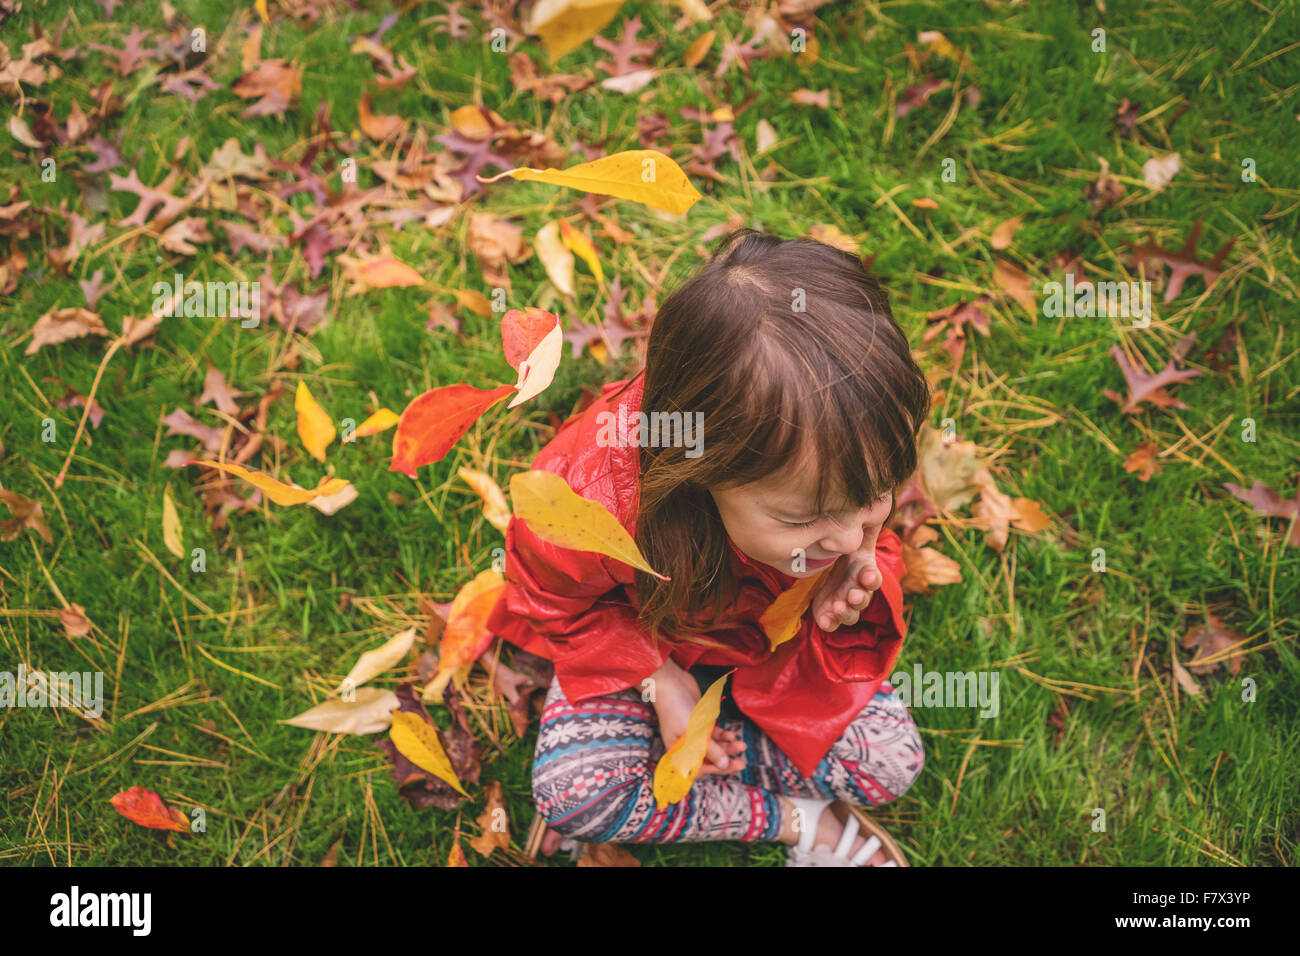 Smiling Girl sitting on grass Stock Photo